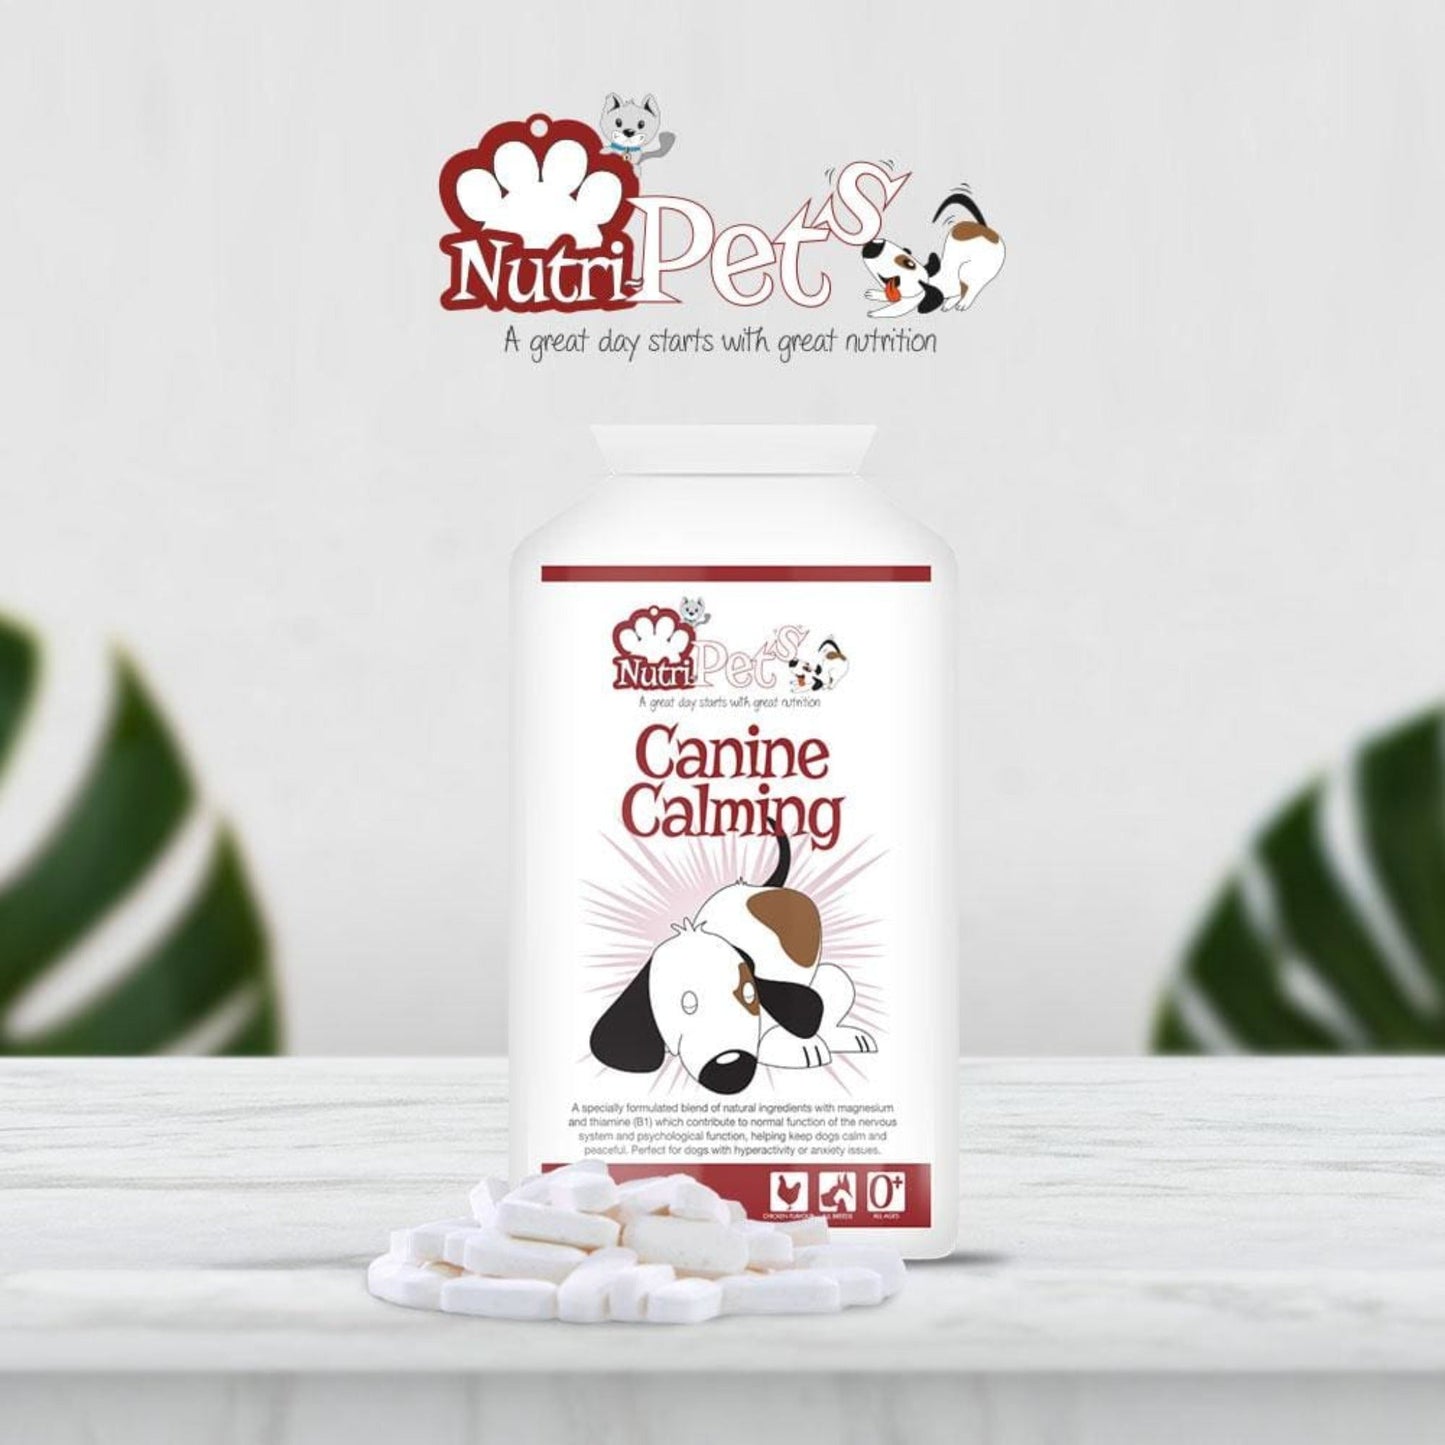 Nutri-Pets Canine Calming bottle and tablets on a table depicting the size of the product